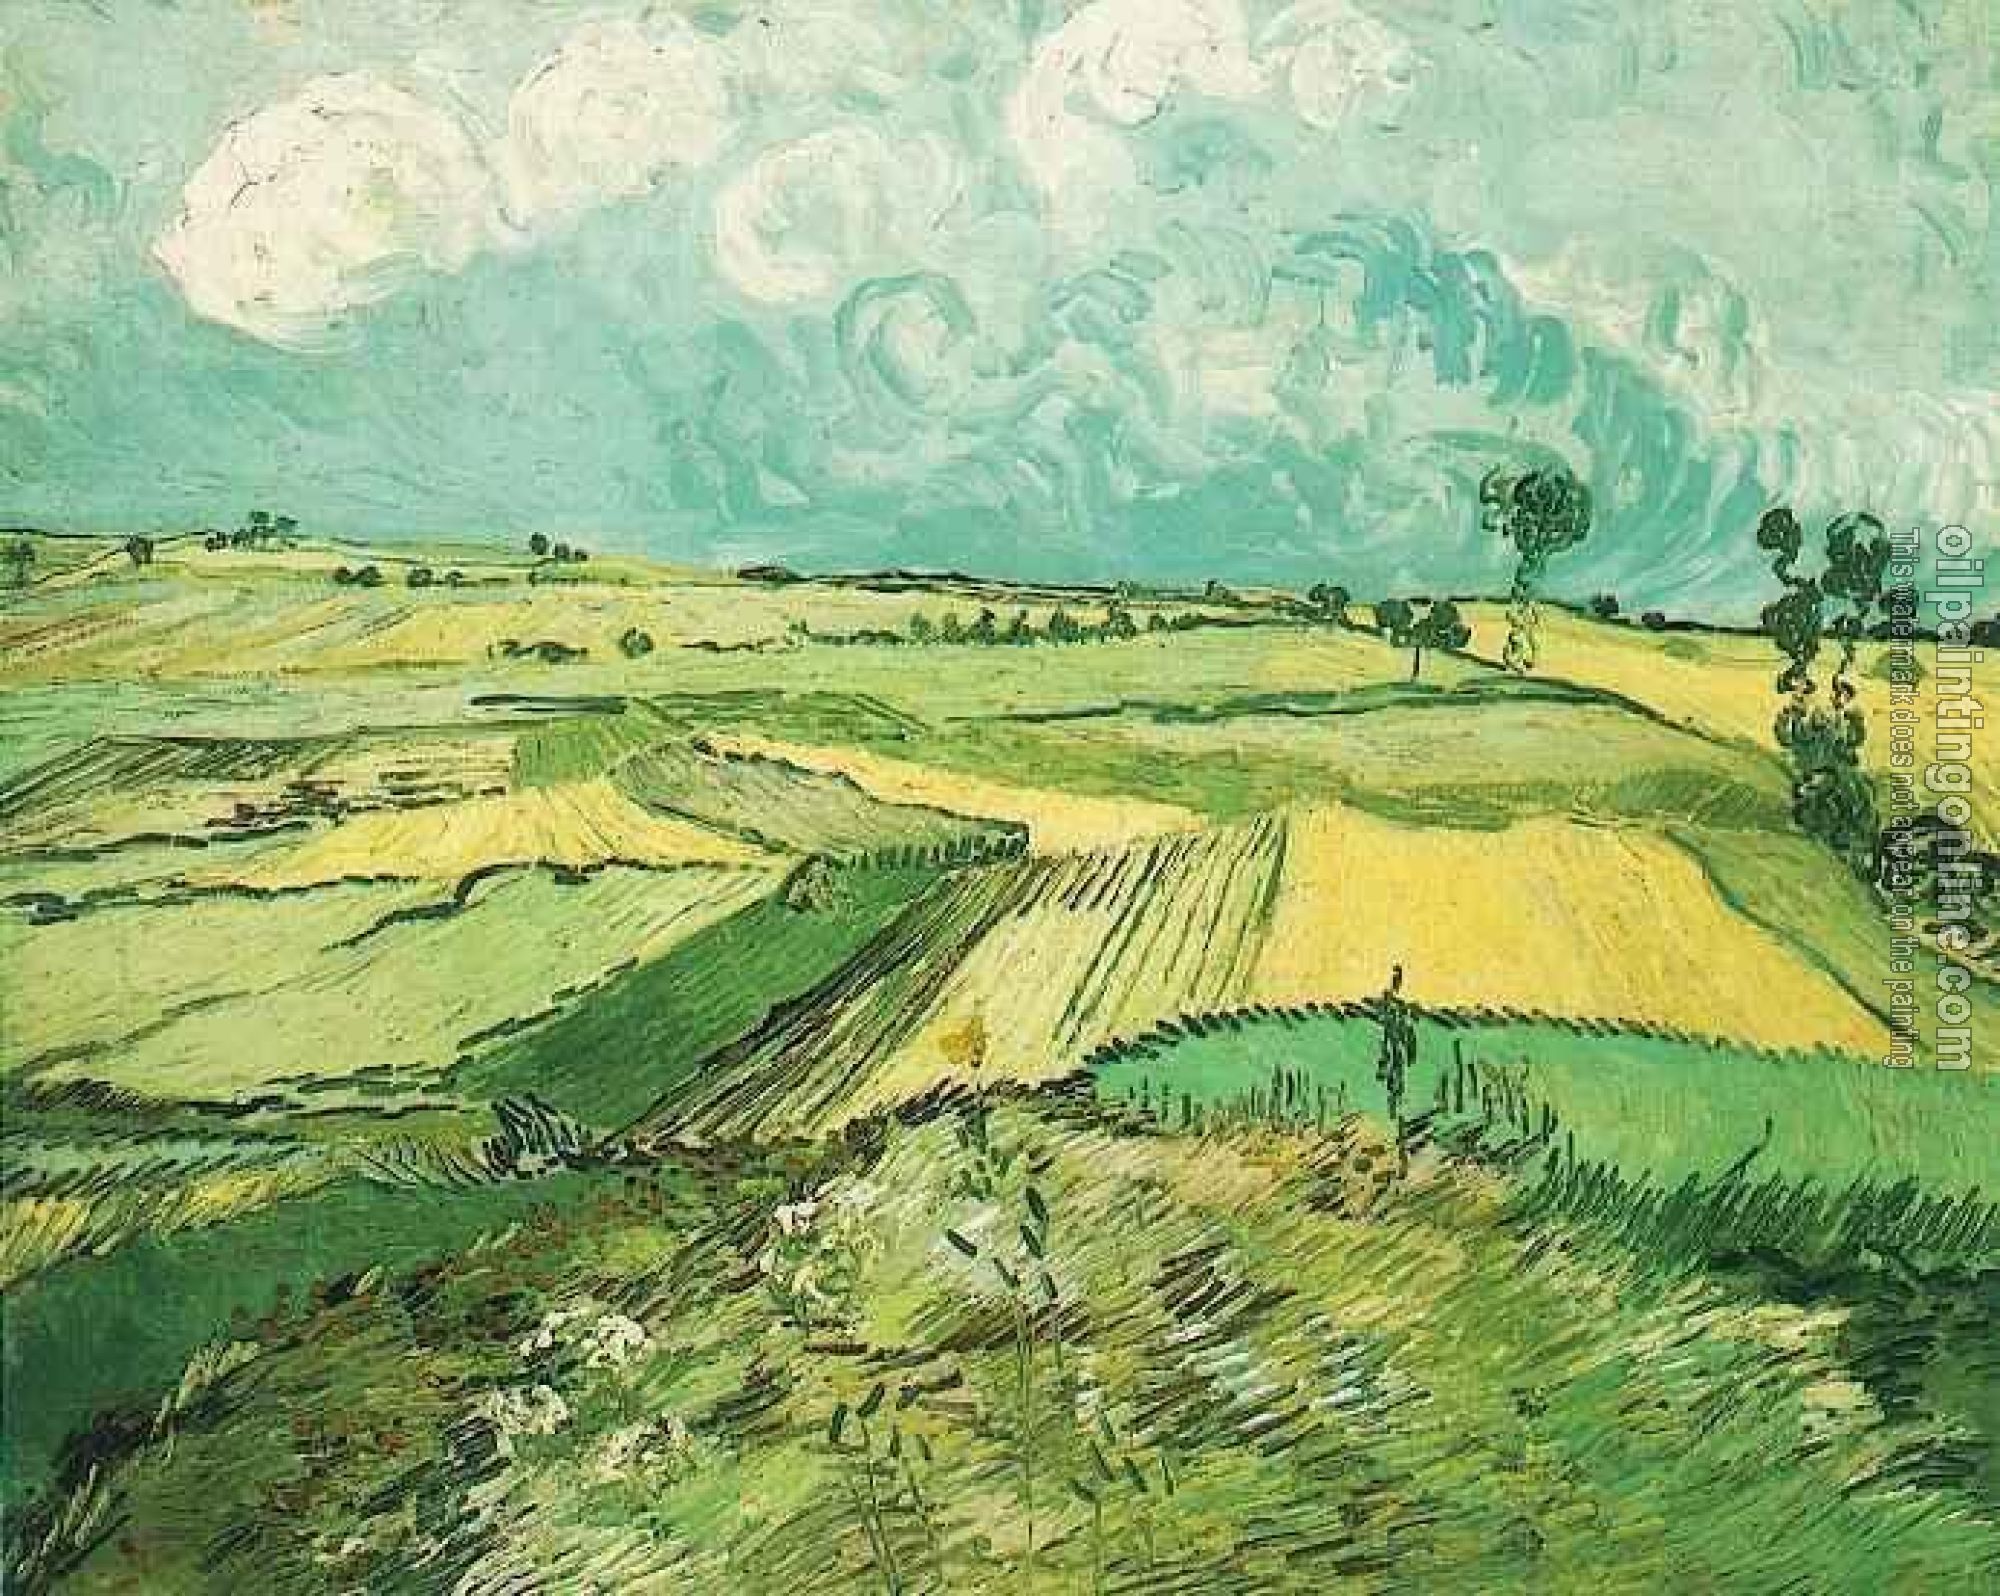 Gogh, Vincent van - Wheat Fields at Auvers Under Clouded Sky